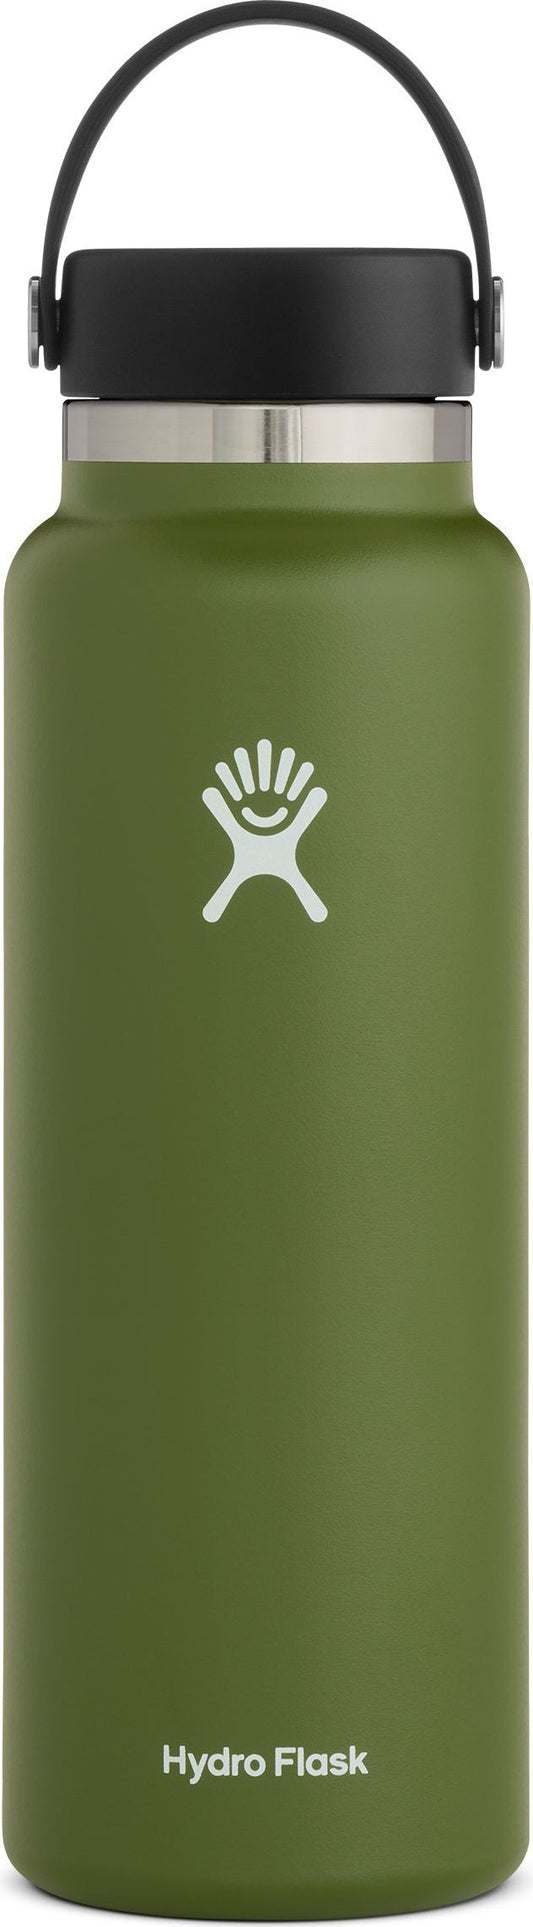 https://cdn.shopify.com/s/files/1/0726/9344/9002/products/Hydro_20Flask-Accessories-40oz-Wide-Mouth-2.0-Olive-31606.jpg?v=1691094764&width=533